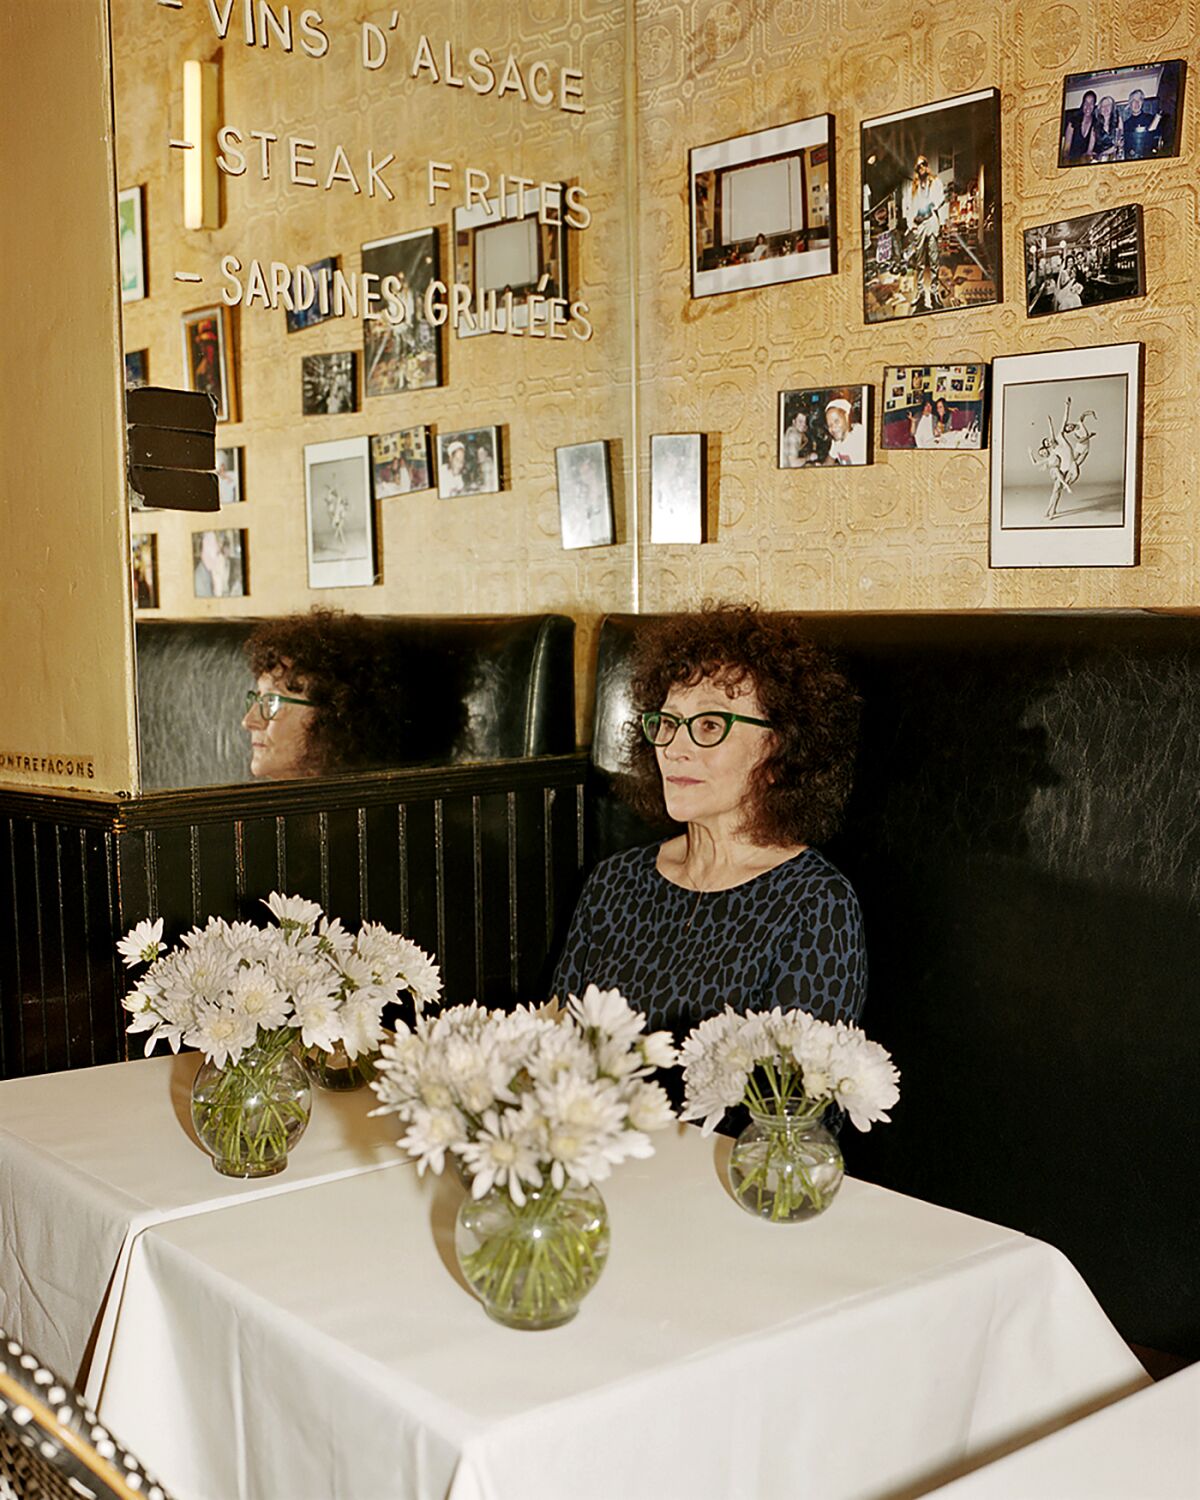 A woman sits in a restaurant banquette with vases of while flowers in front of her.